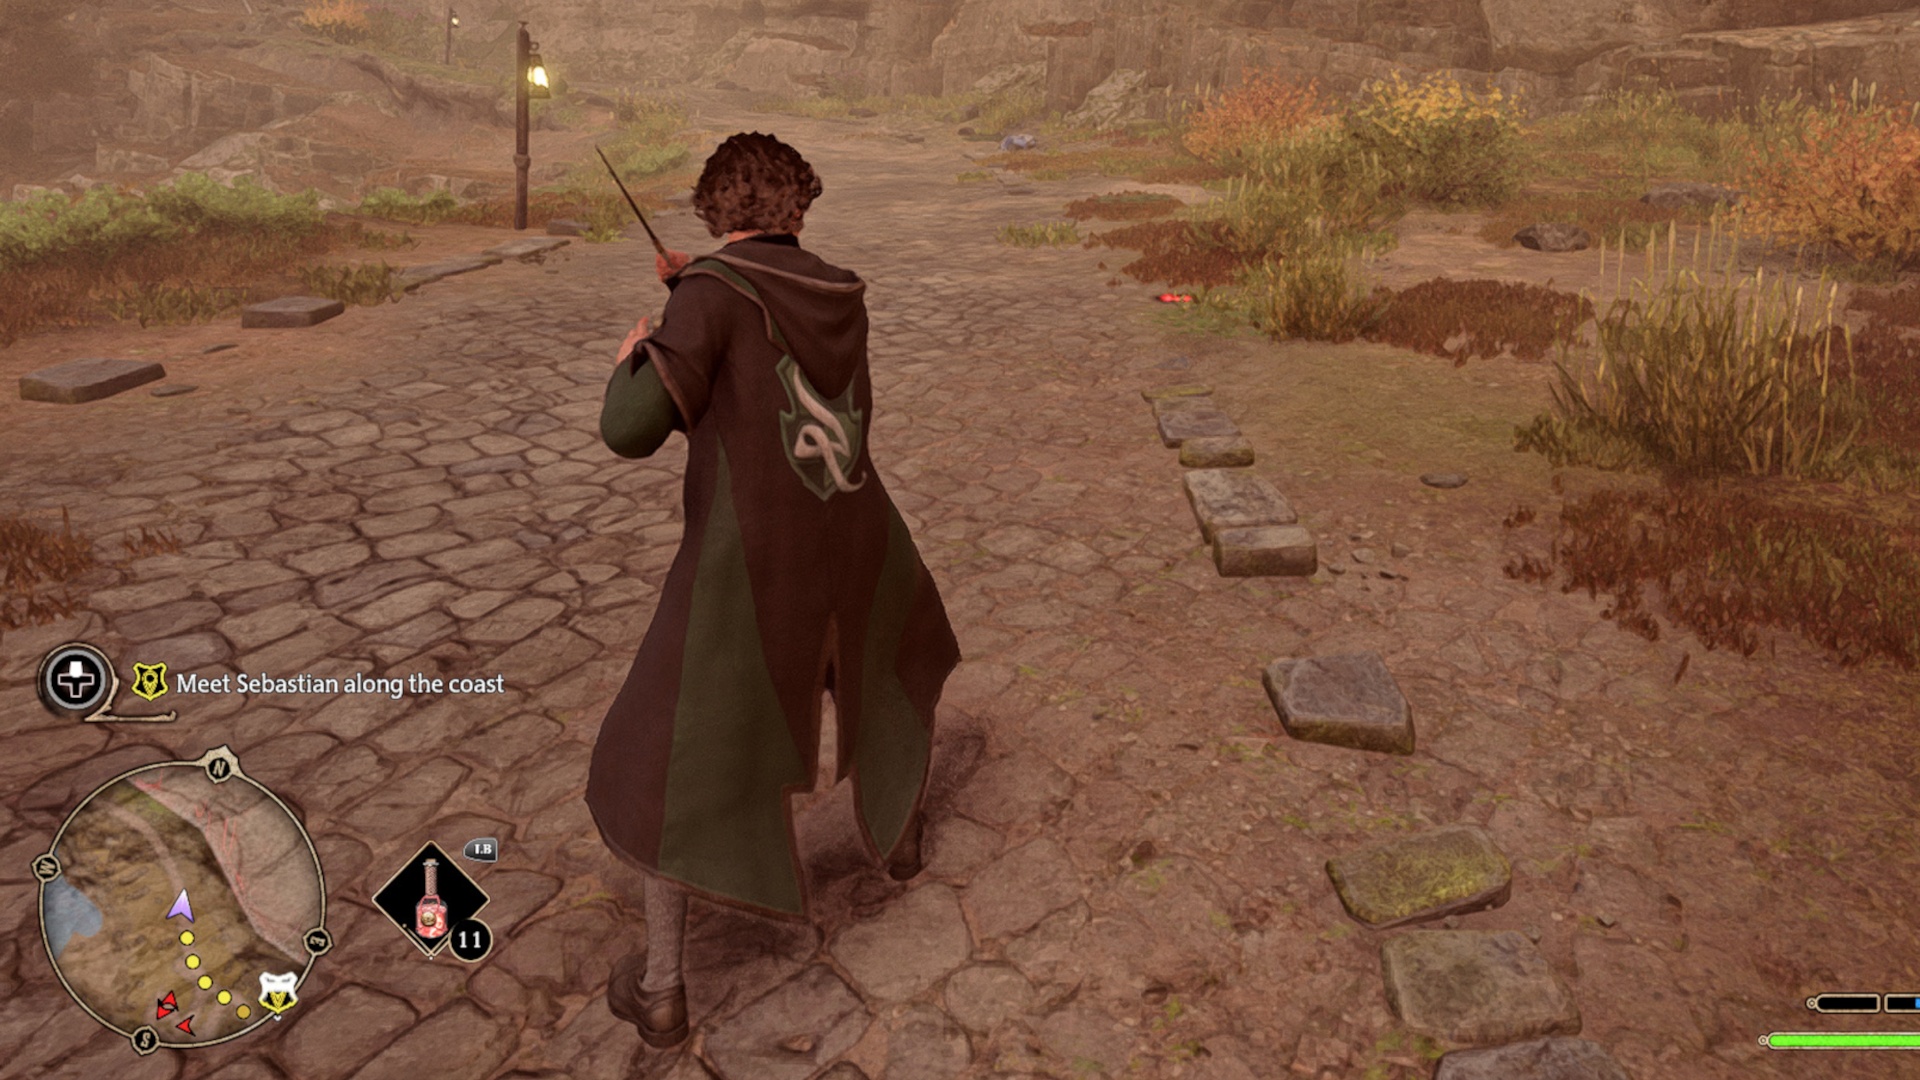 (If you want to show your house affiliation, you can customize your robes of the dark arts. (Image source: Nexusmods.com))